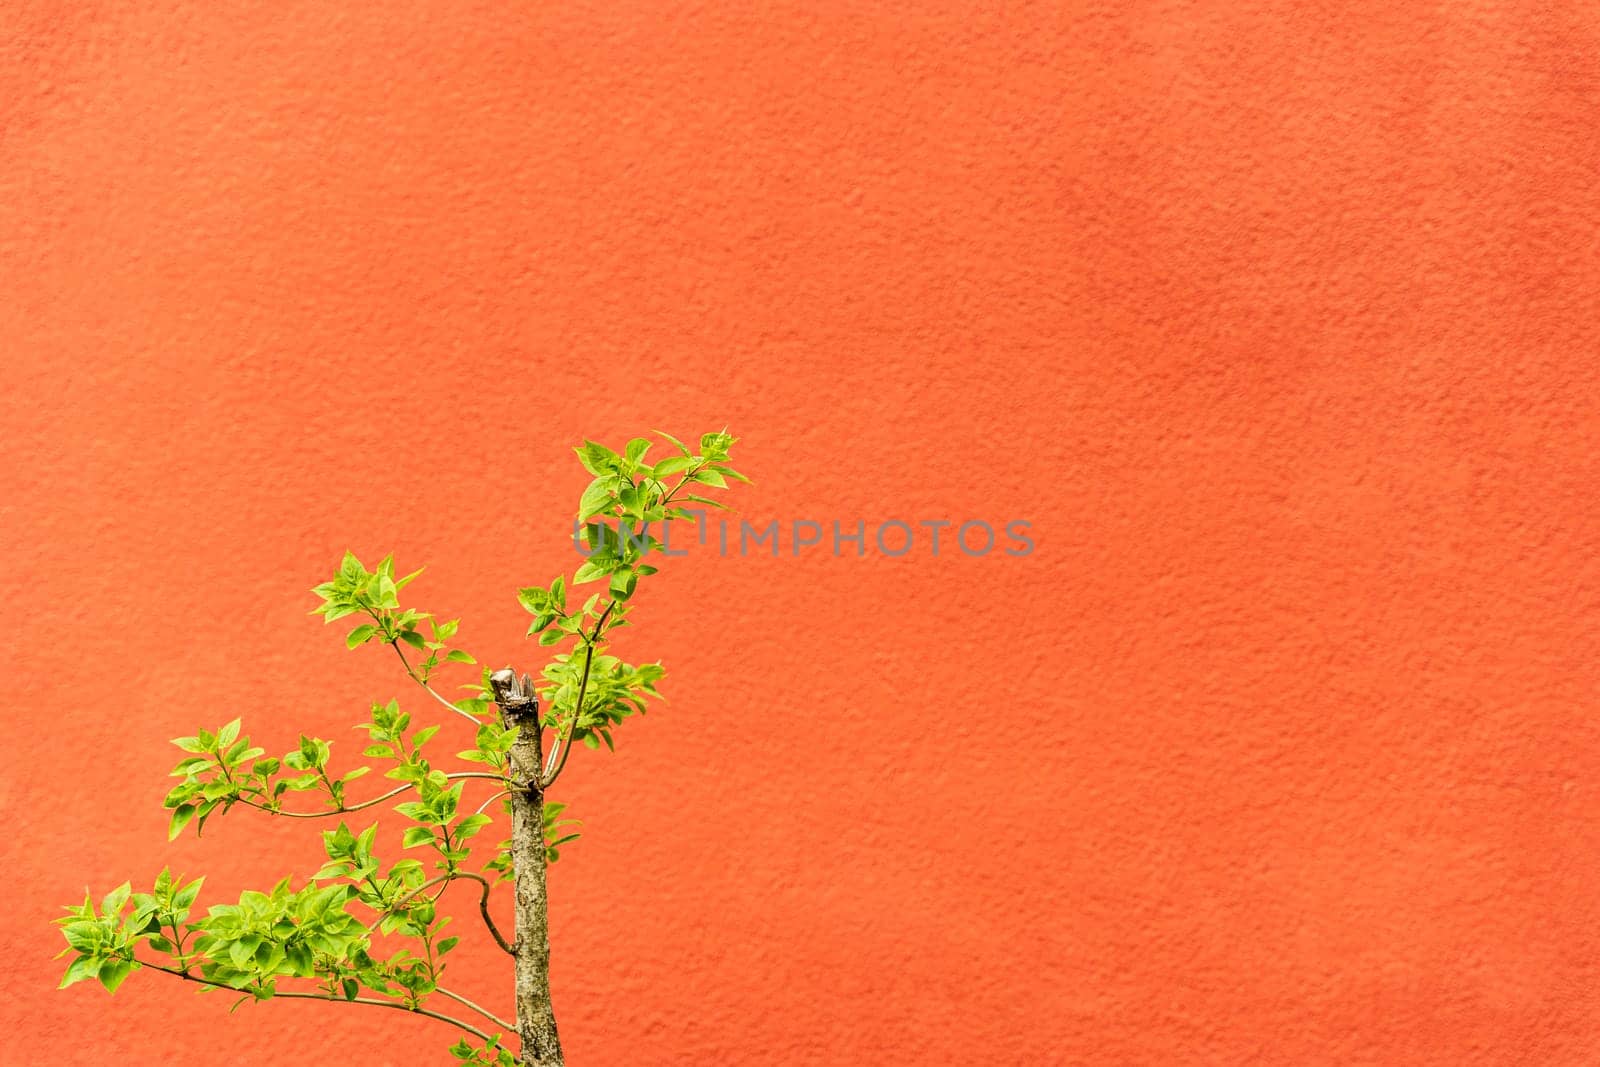 a green tree branch on a red-orange textured background. a symbol of life. greenery